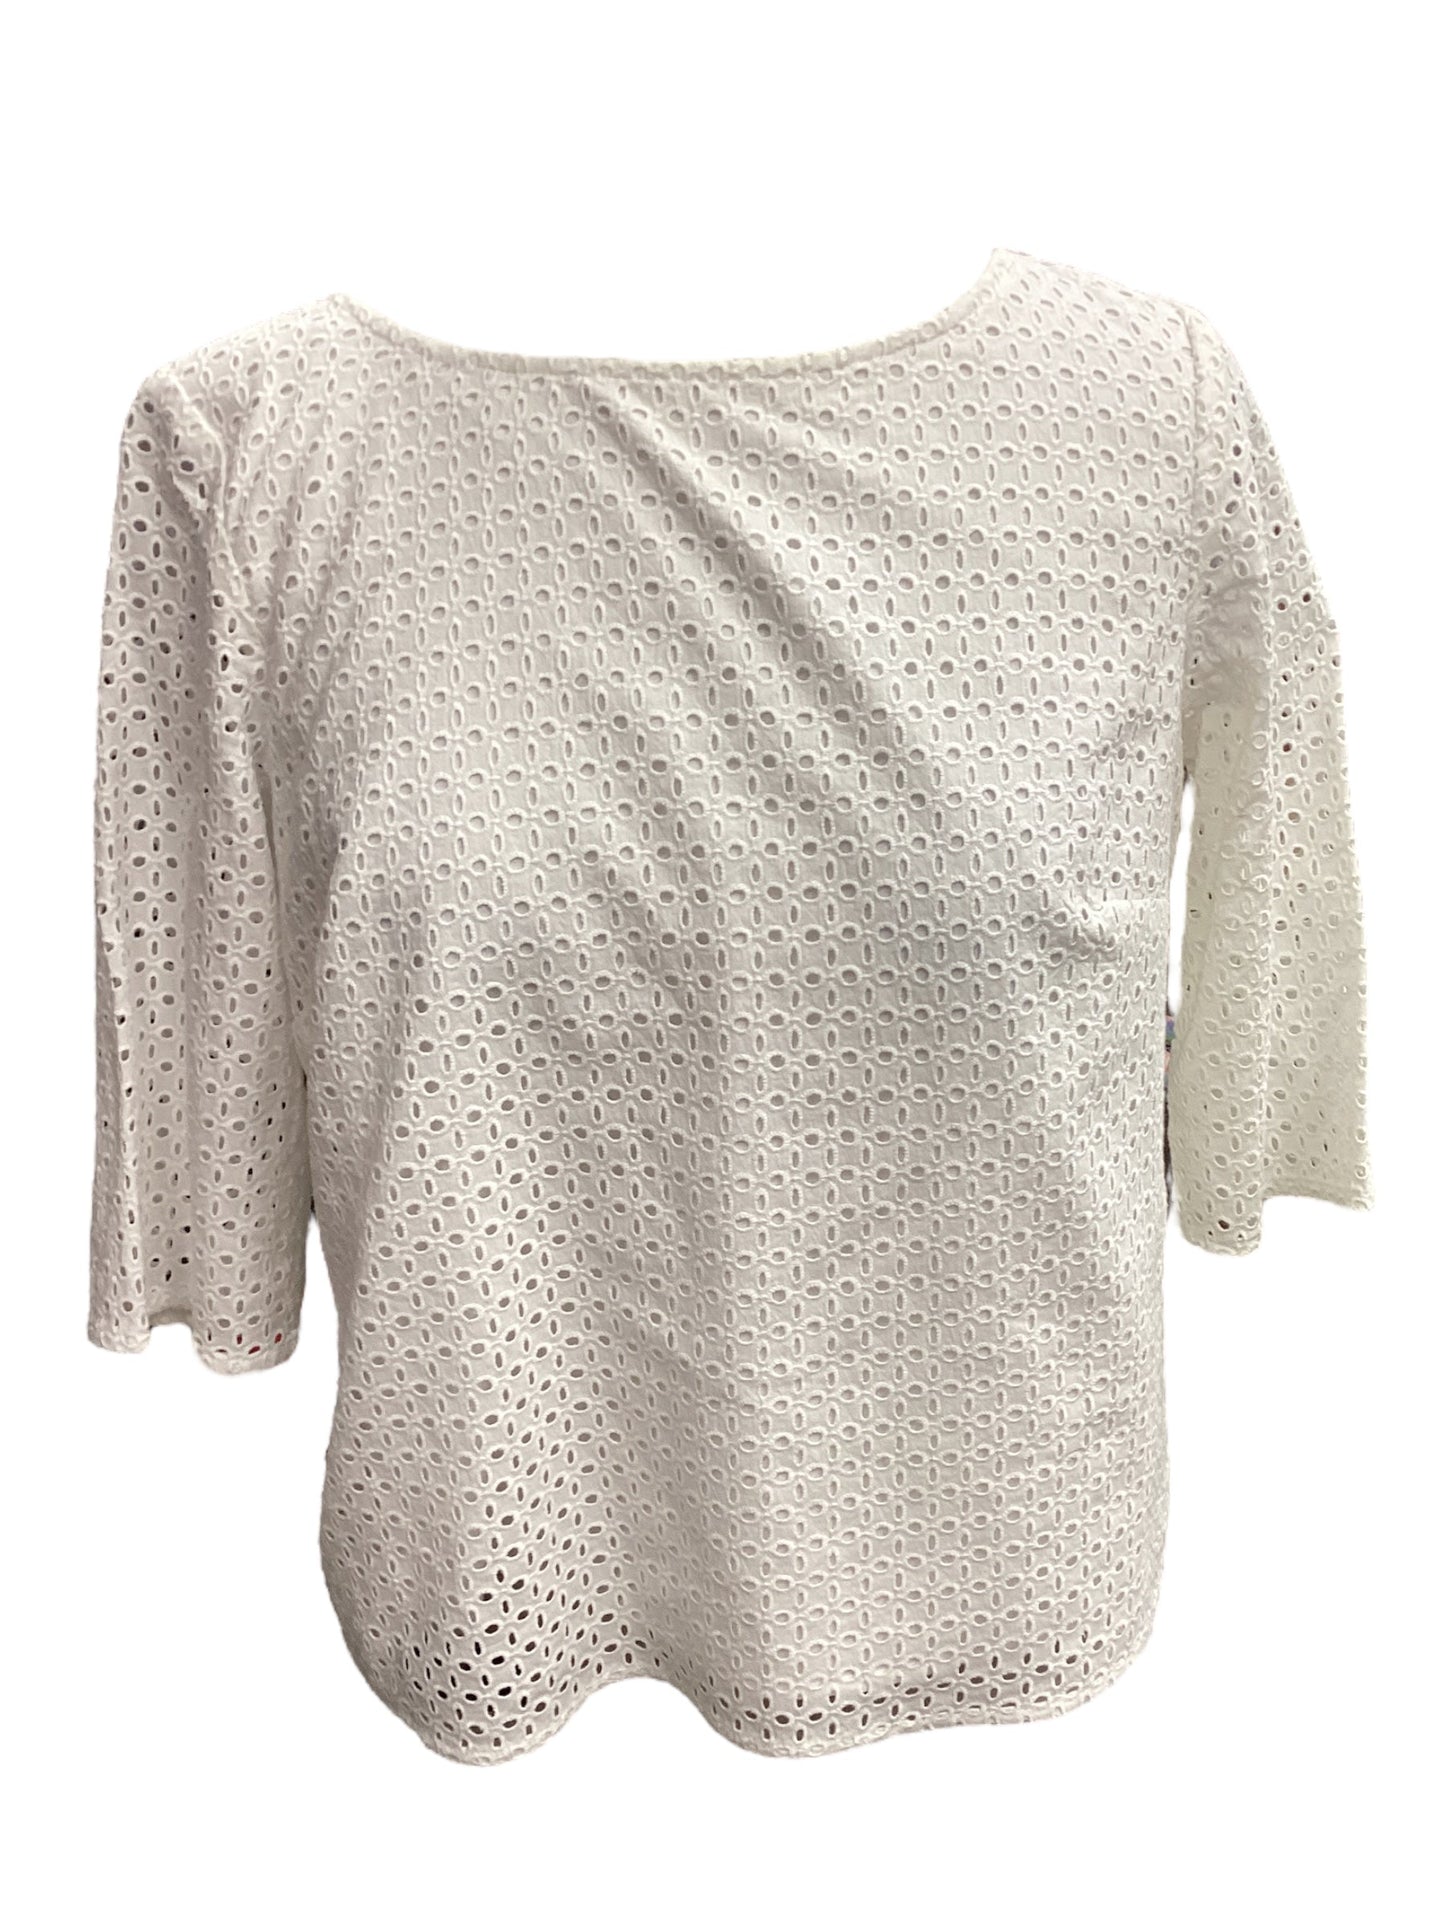 White Top 3/4 Sleeve Clothes Mentor, Size M